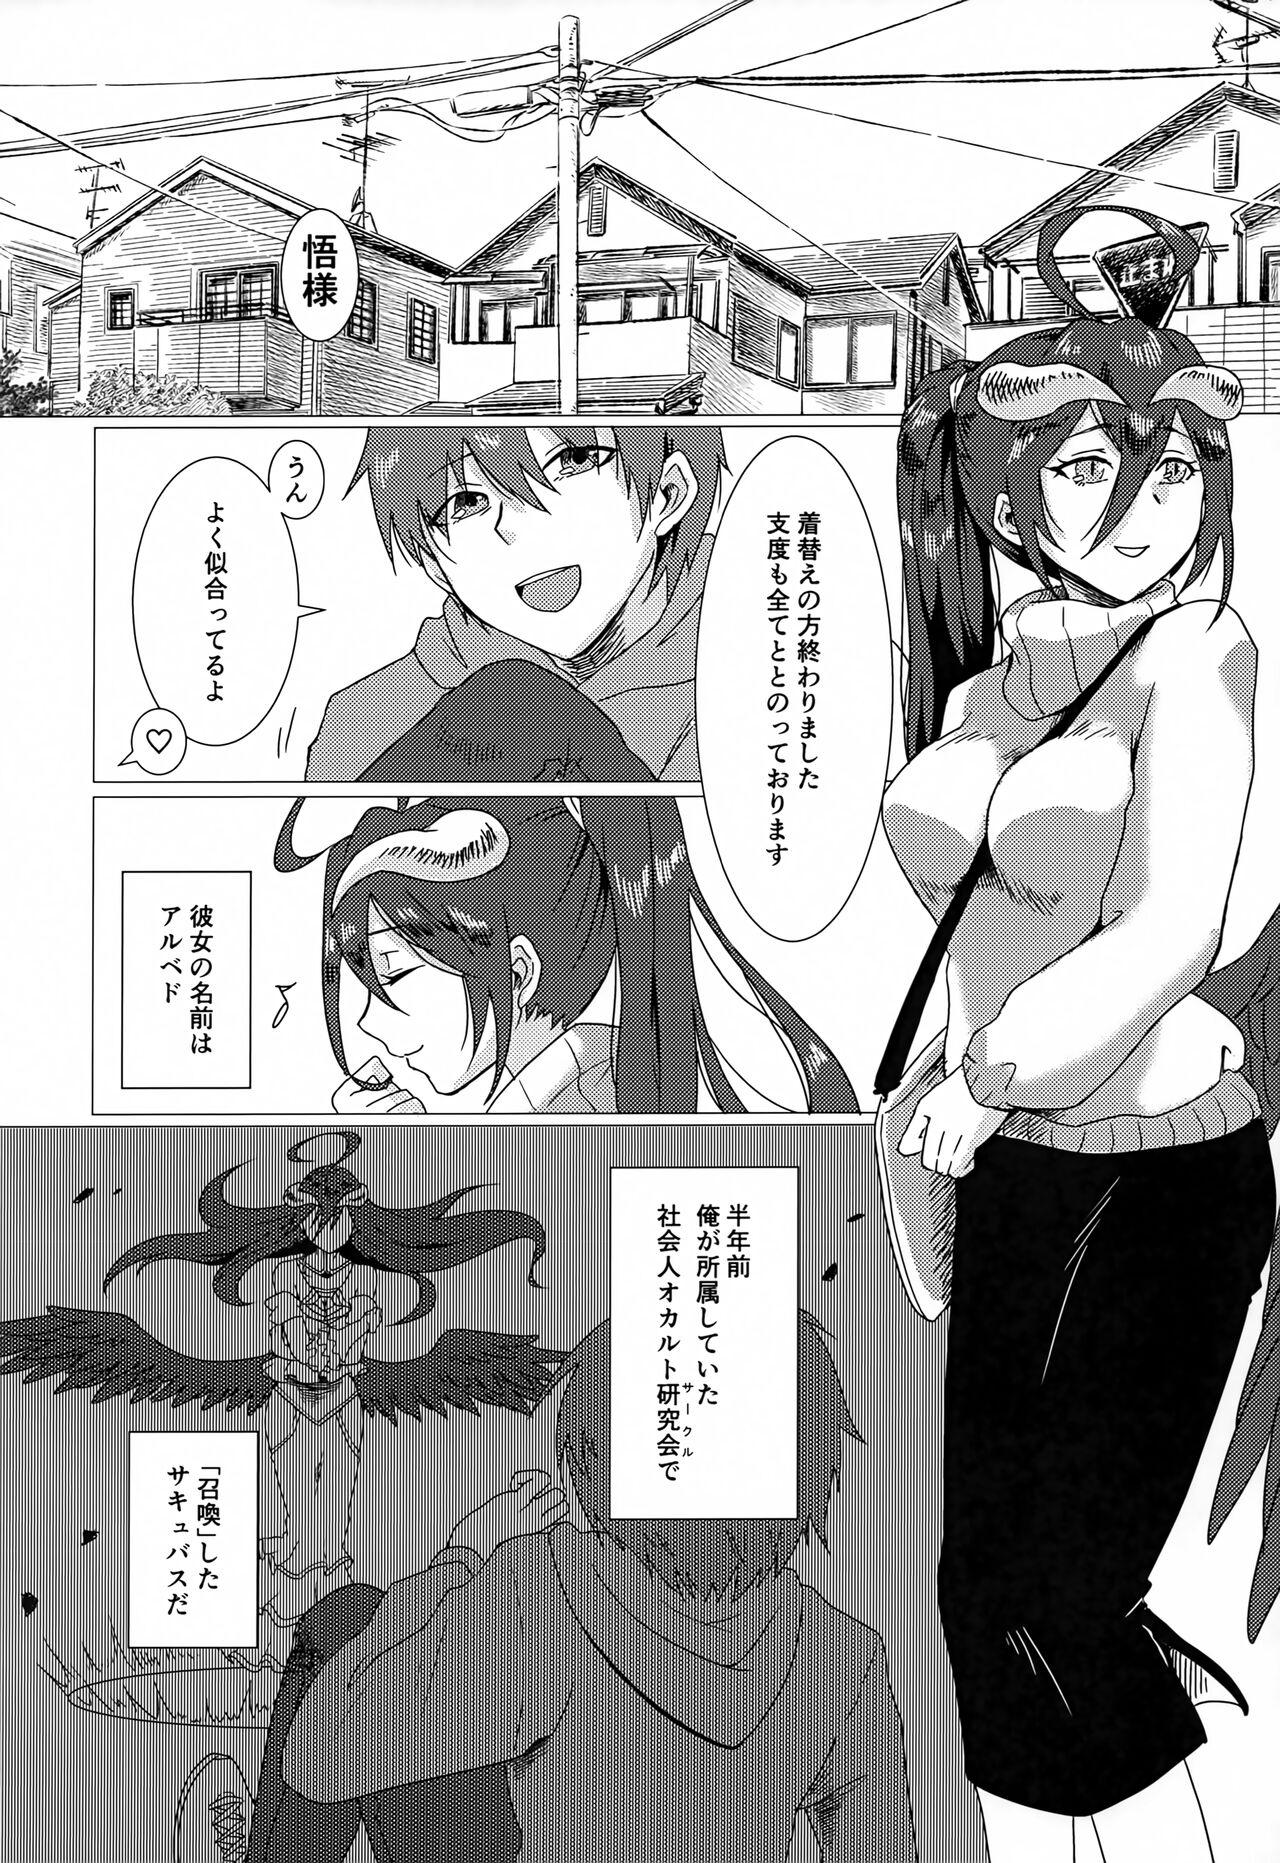 Strap On Albedo-san to! 2 - Overlord Long Hair - Page 3